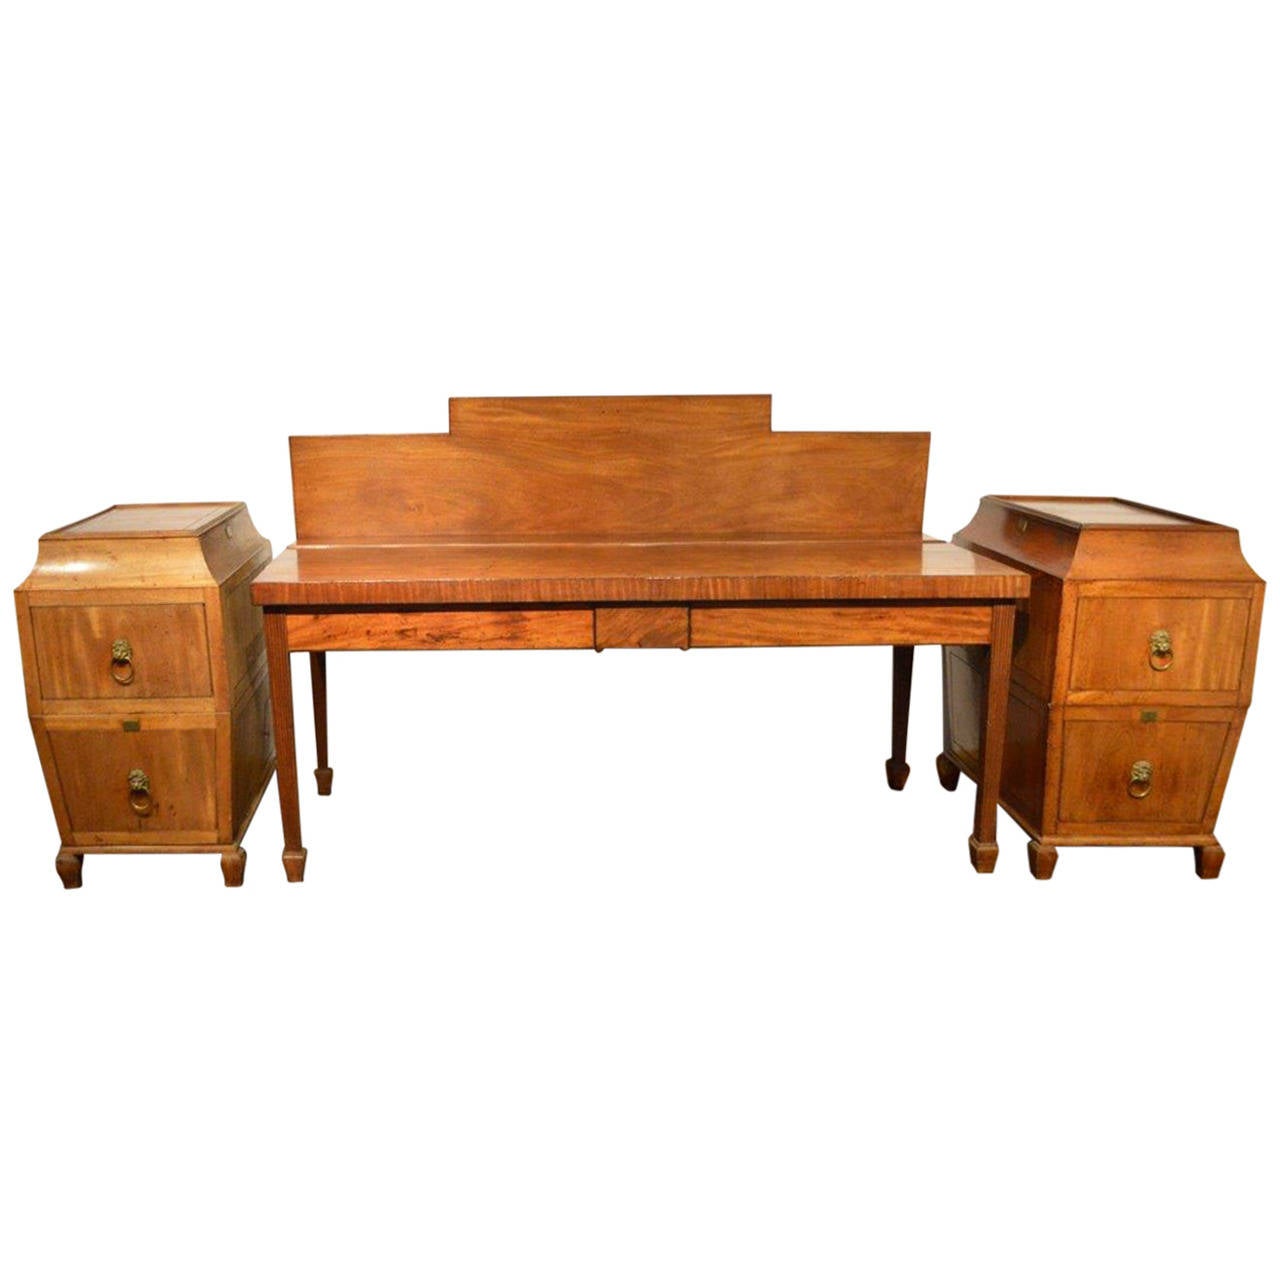 Large-Scale Regency Period Mahogany Serving Table with Pair of Pedestals For Sale